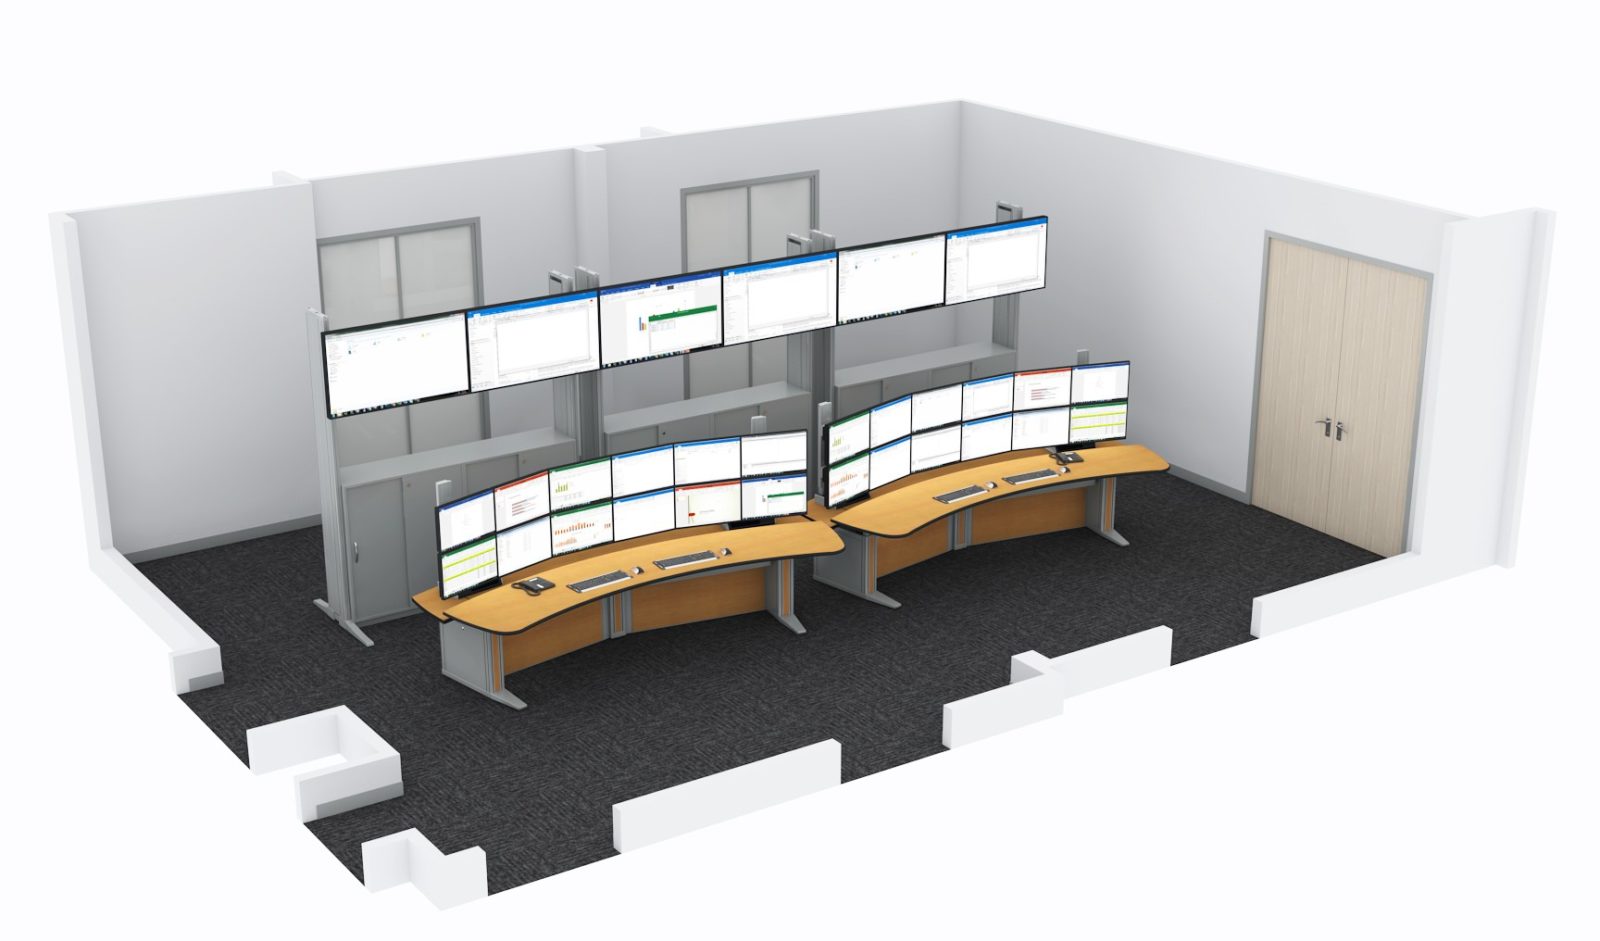 Graphic 3-D illustration of Ergocon workstations in a room